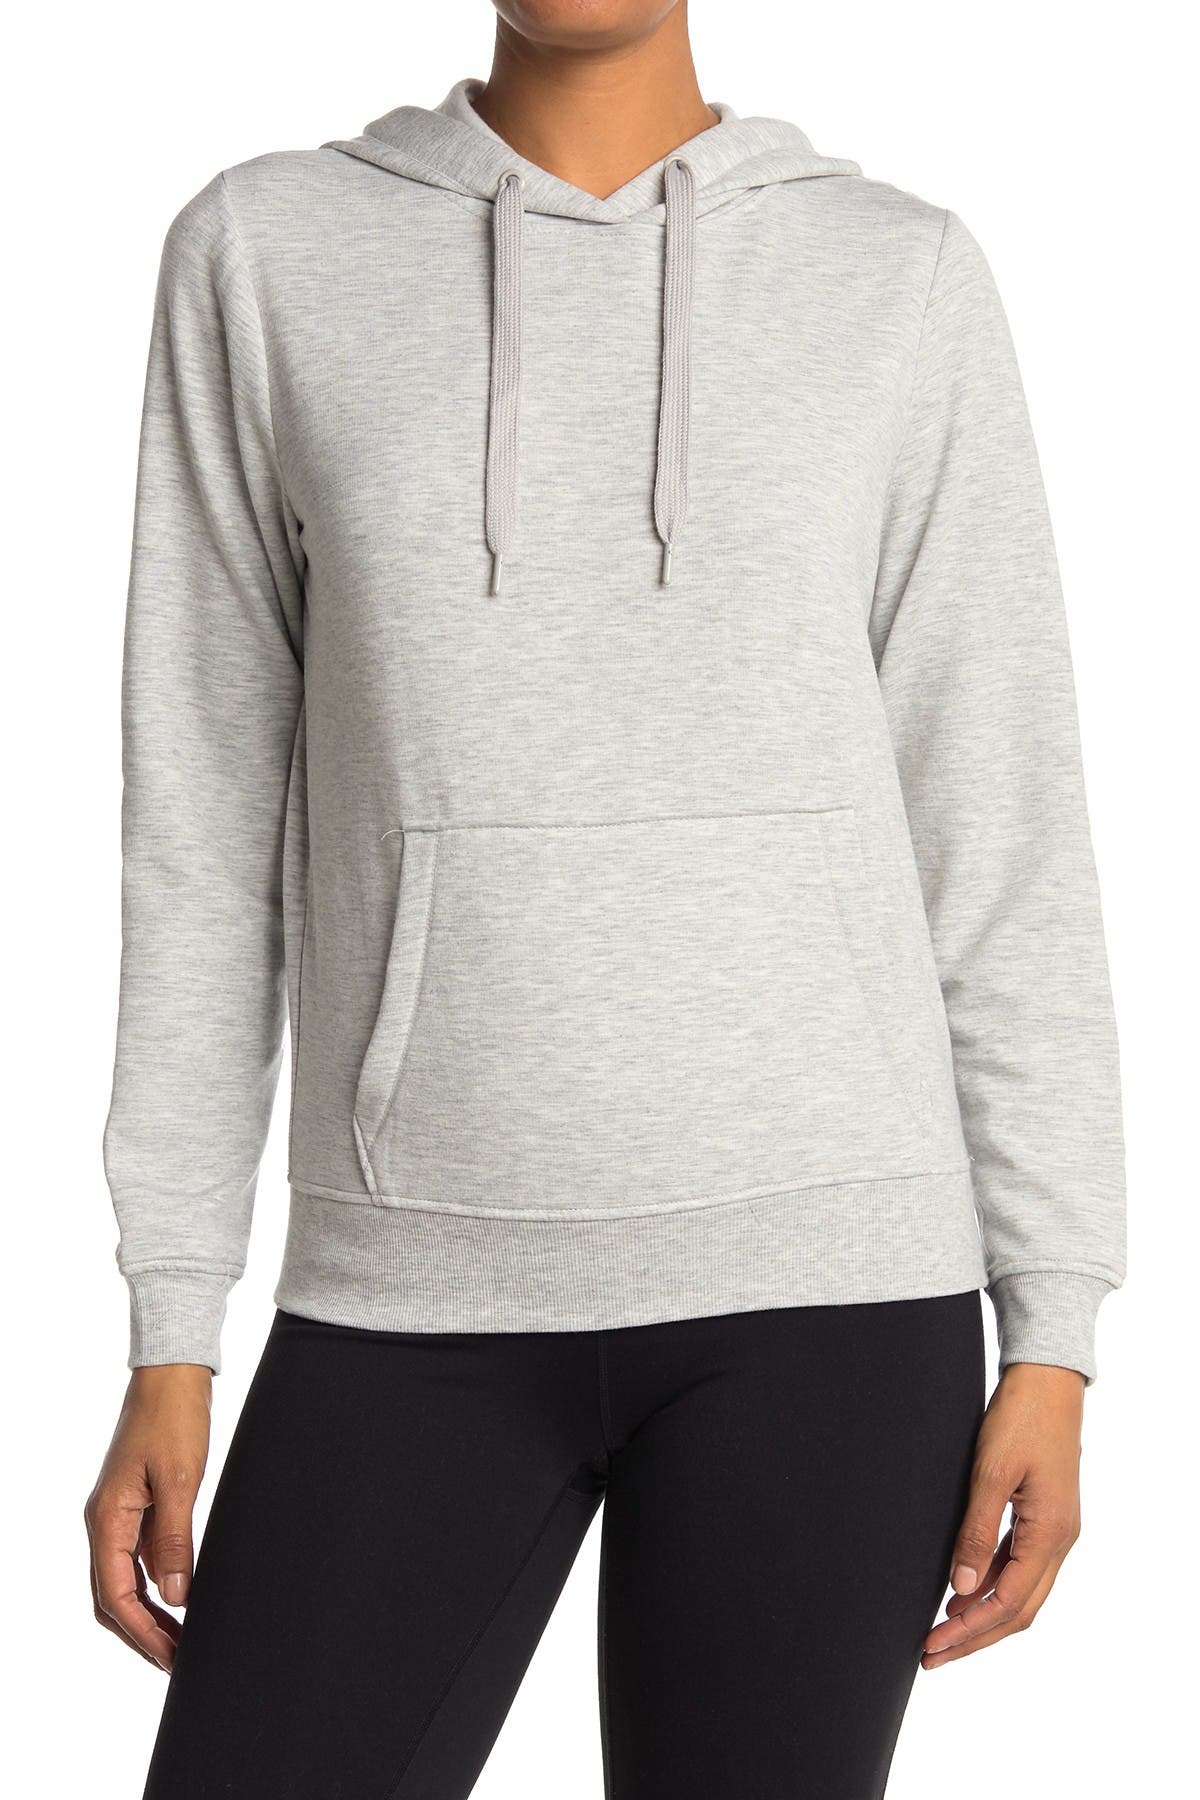 90 Degree By Reflex Terry Brushed Pullover Hoodie In Medium Grey3